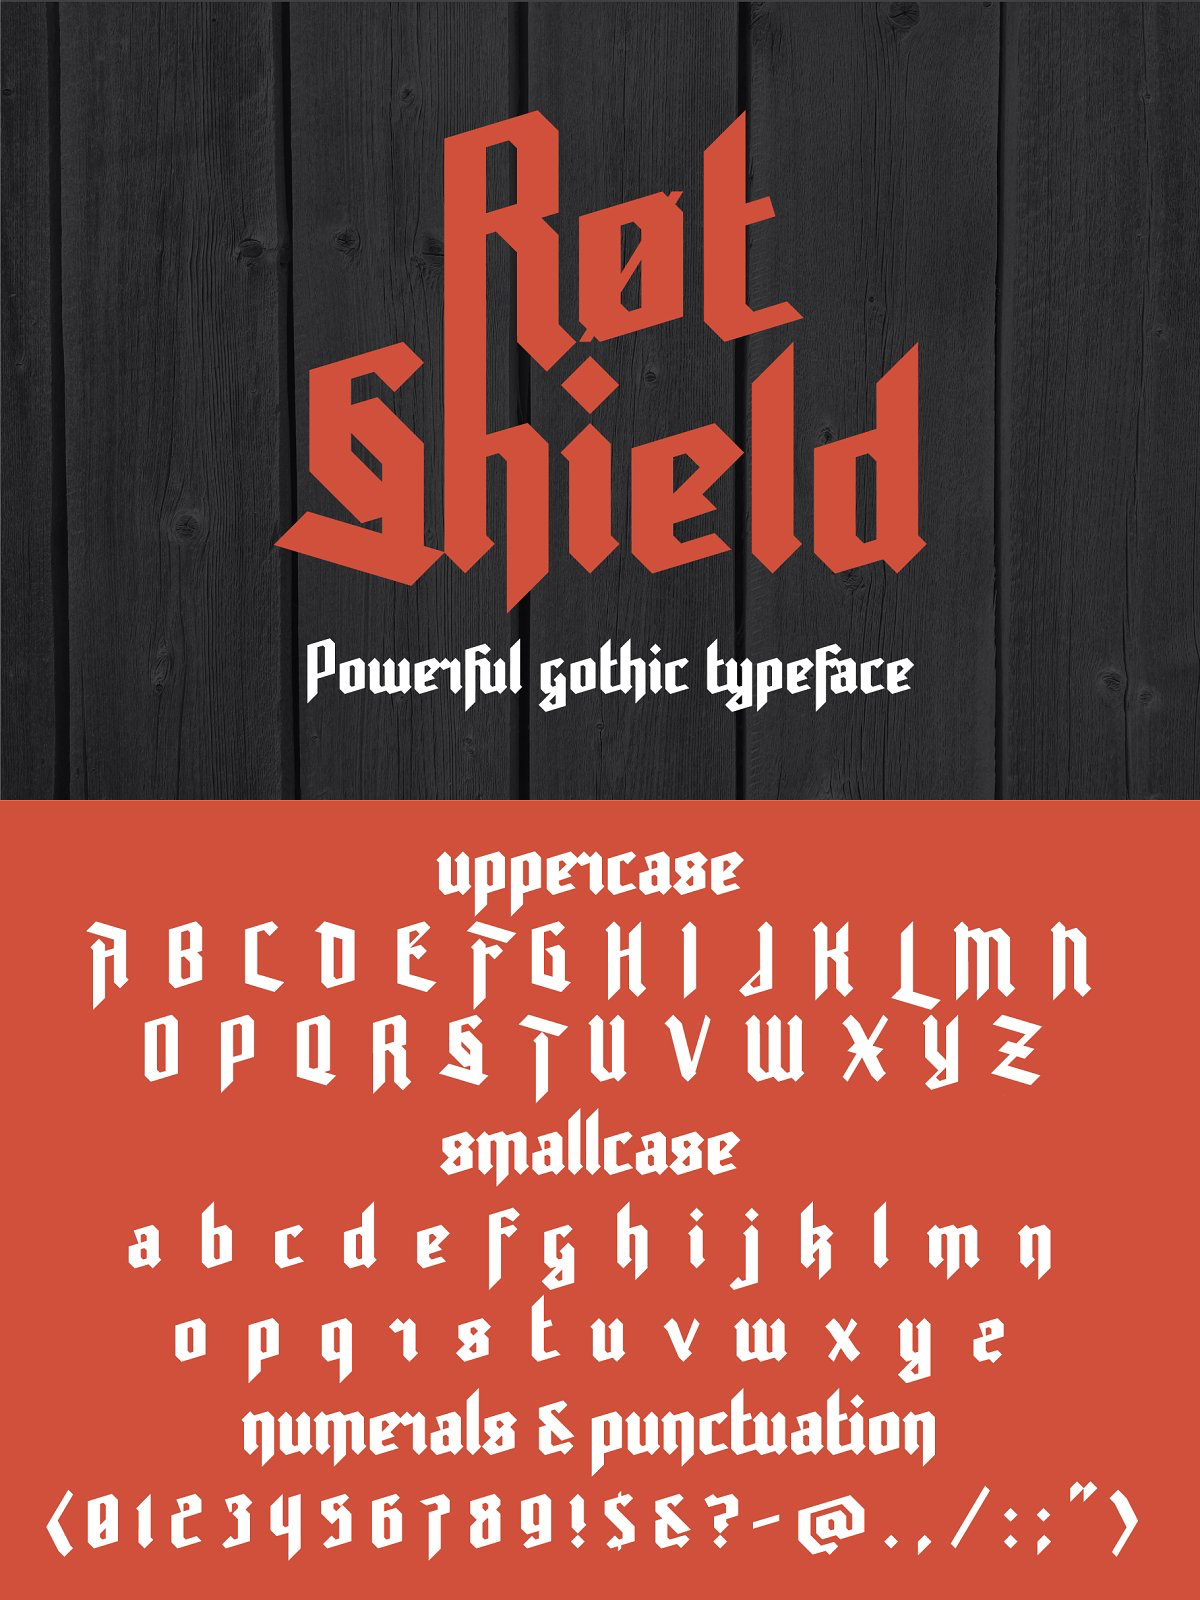 Rot shield pinterest image preview.